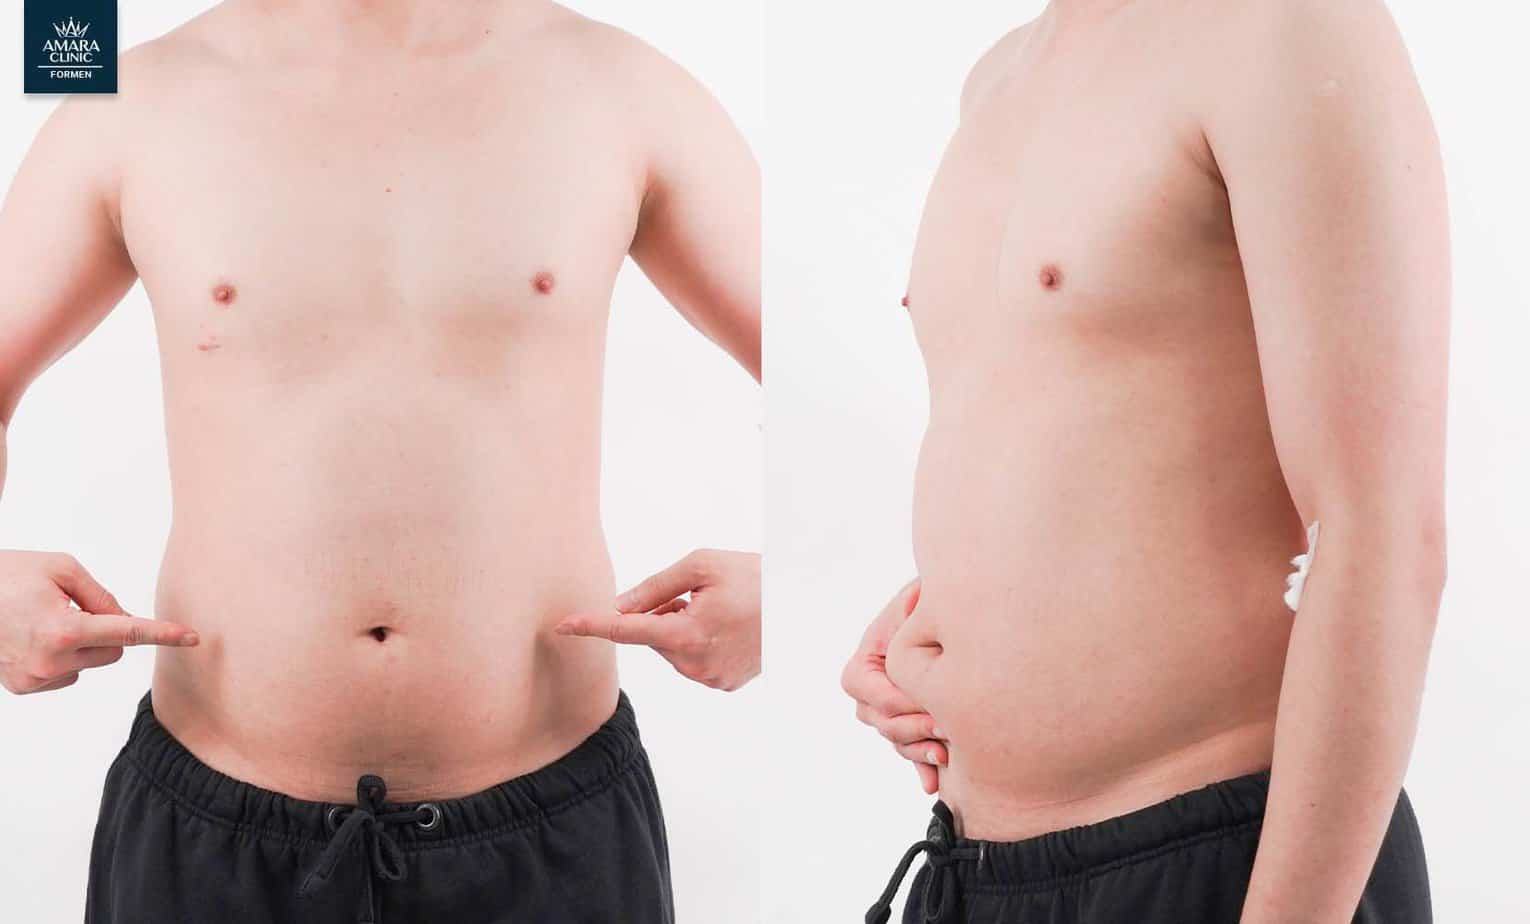 Review - Before liposuction